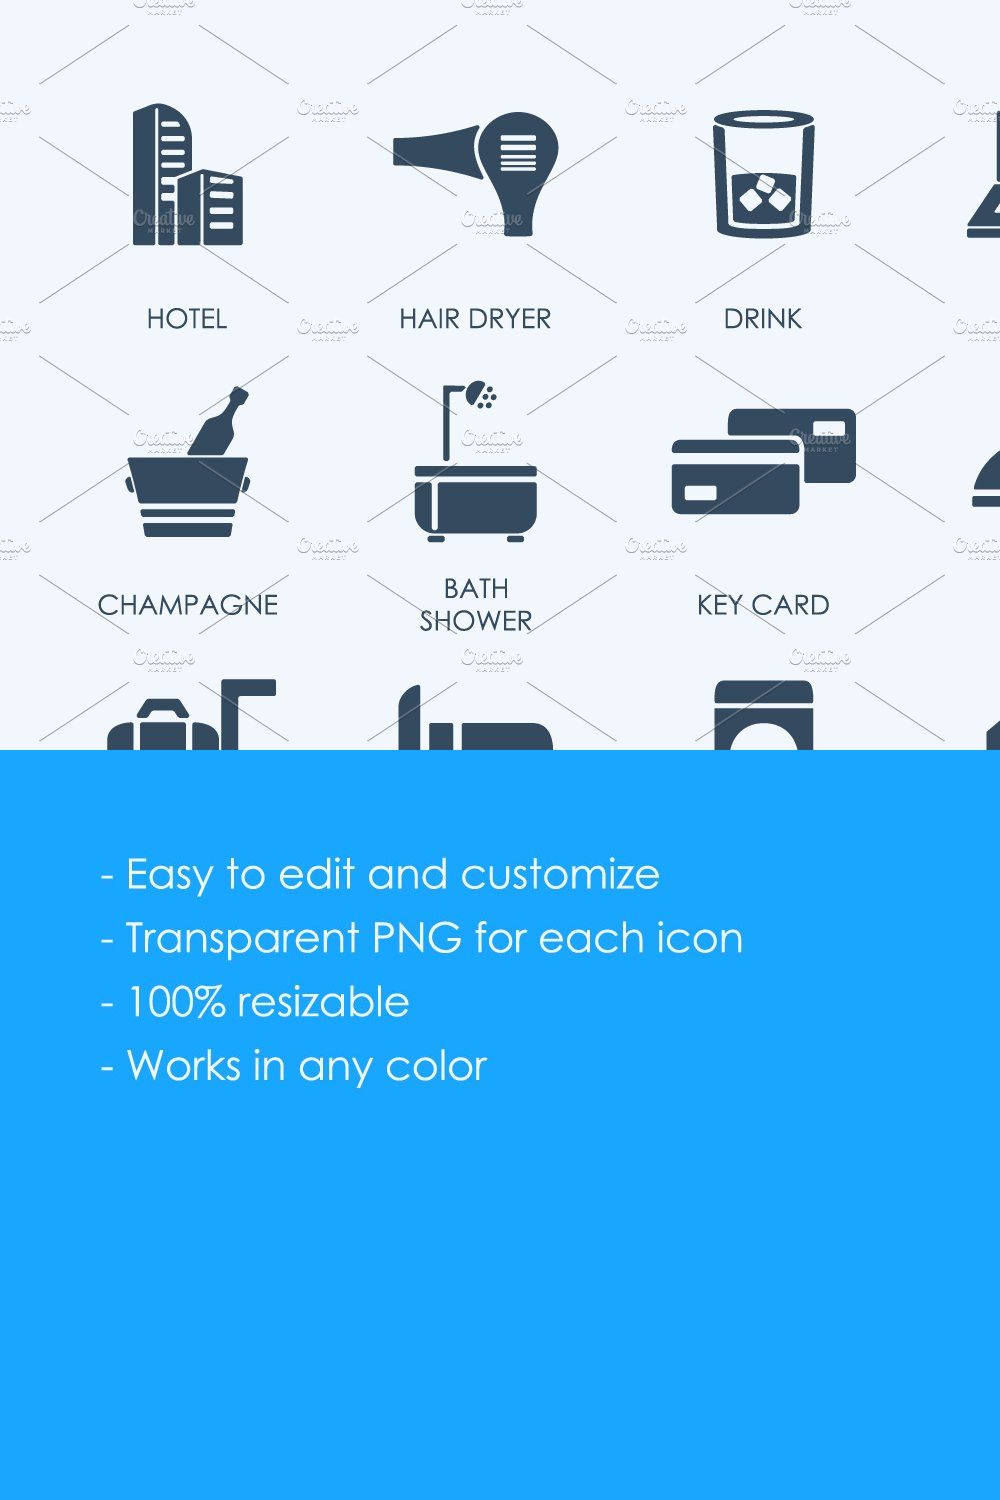 Hotel icons pinterest preview image.